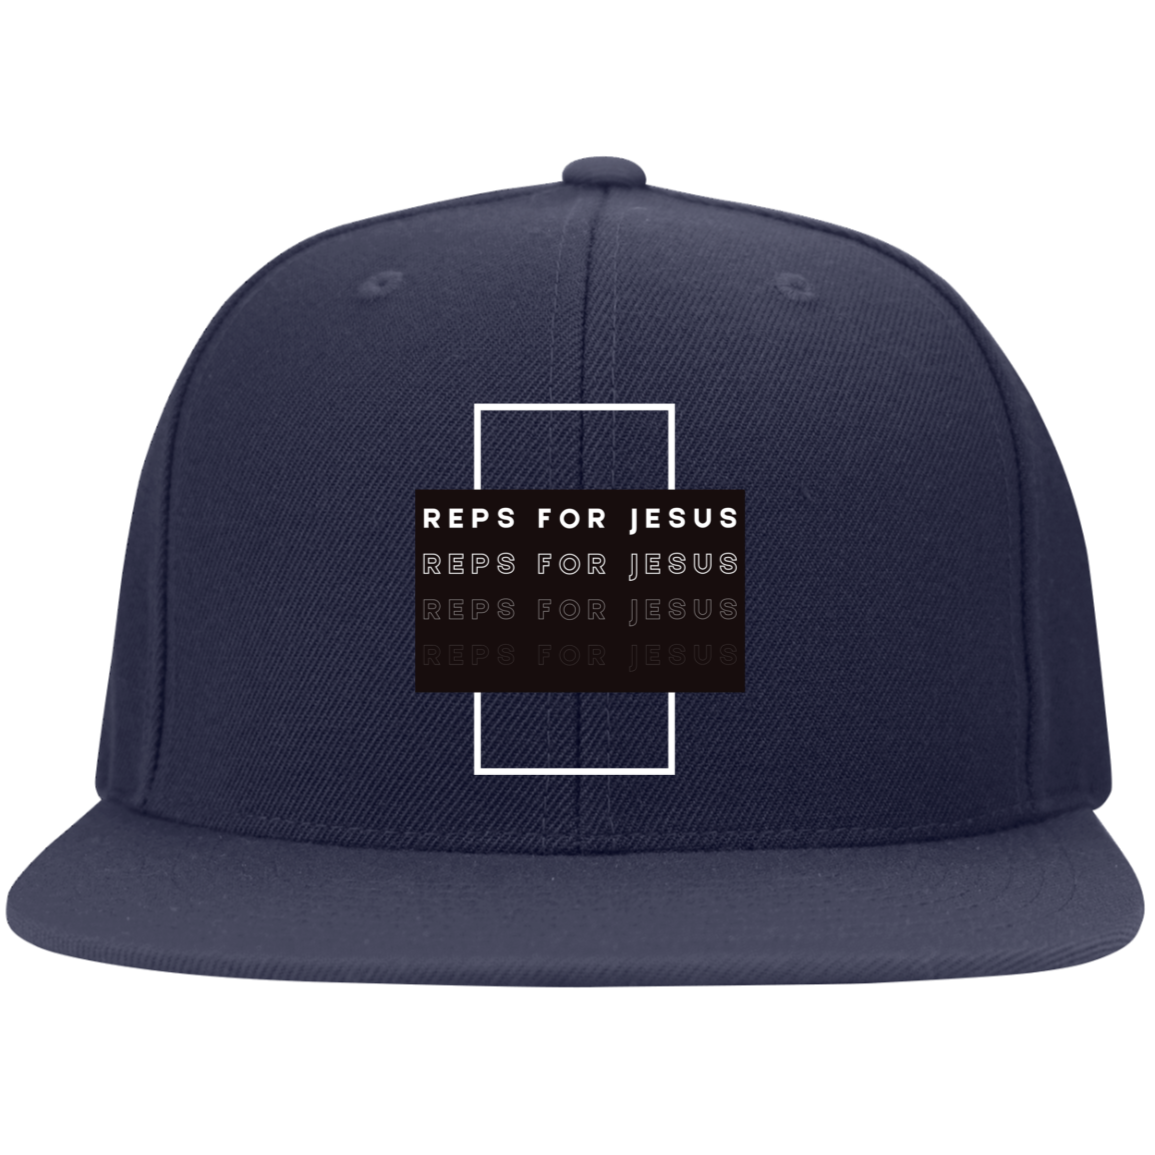 REPS FOR JESUS FLAT BILL HAT